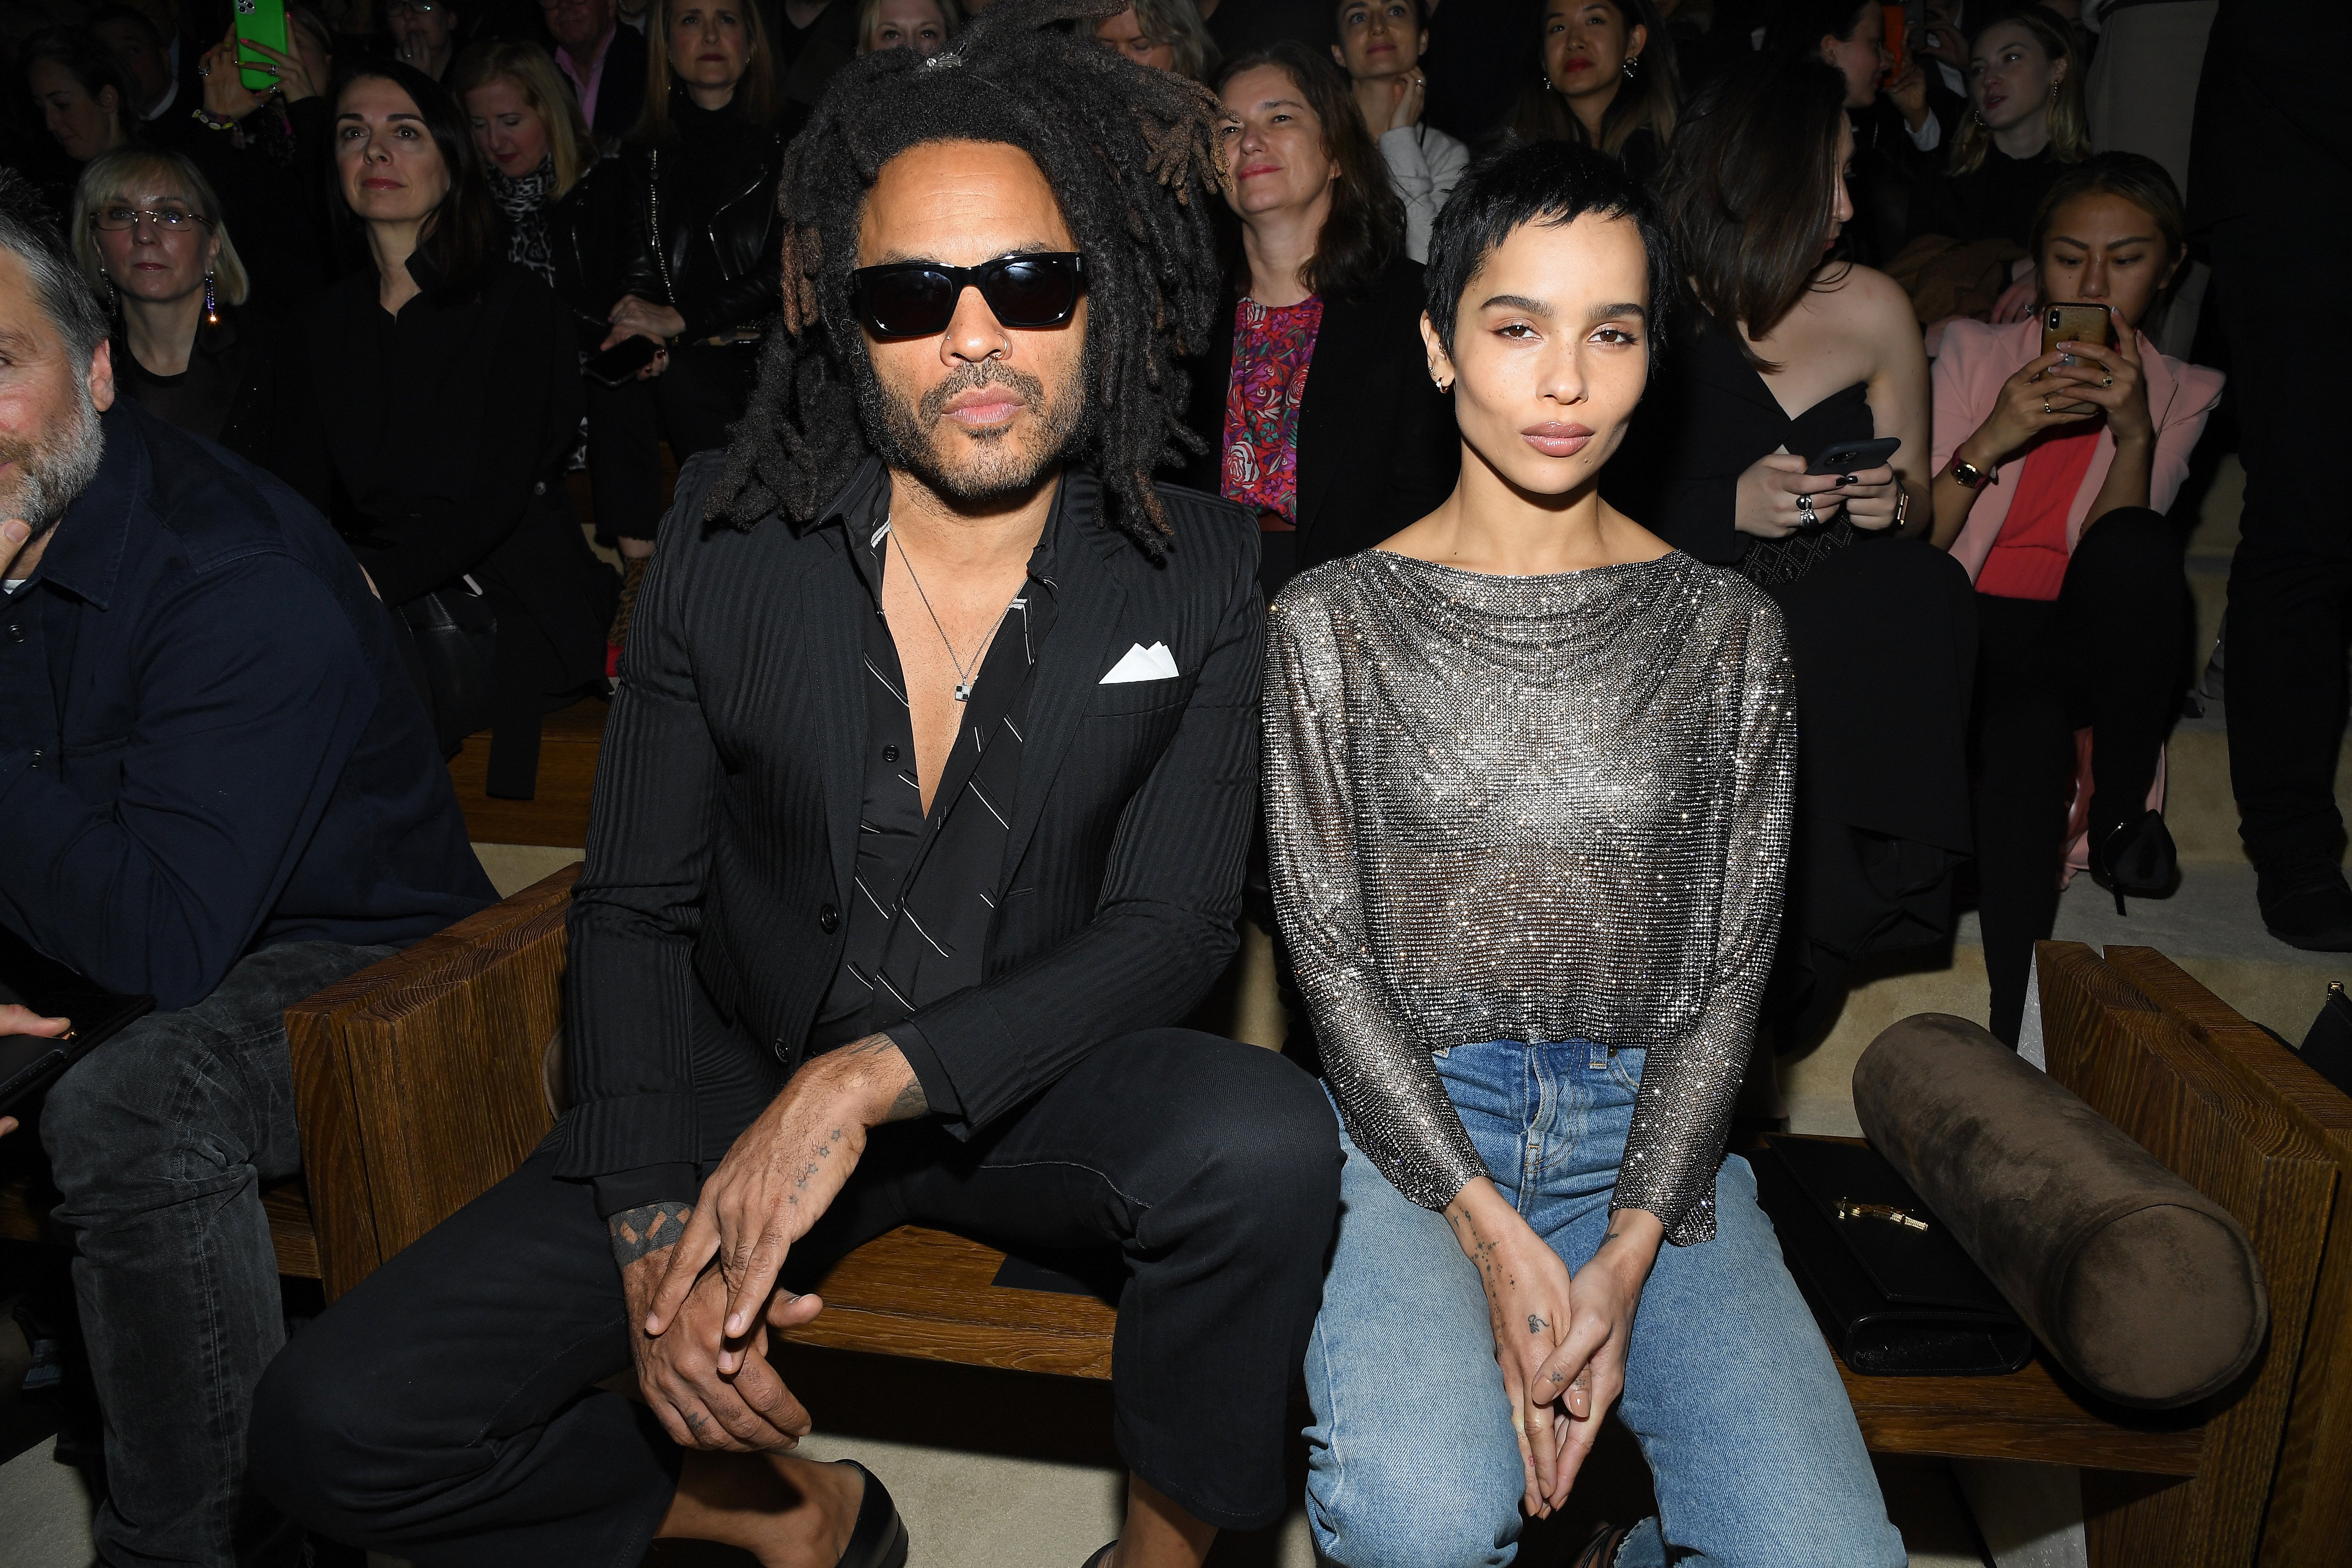 Lenny and Zoe Kravitz at the Saint Laurent show for the Paris Fashion Week Womenswear Fall/Winter 2020/2021 on February 25, 2020, in Paris, France. | Source: Getty Images